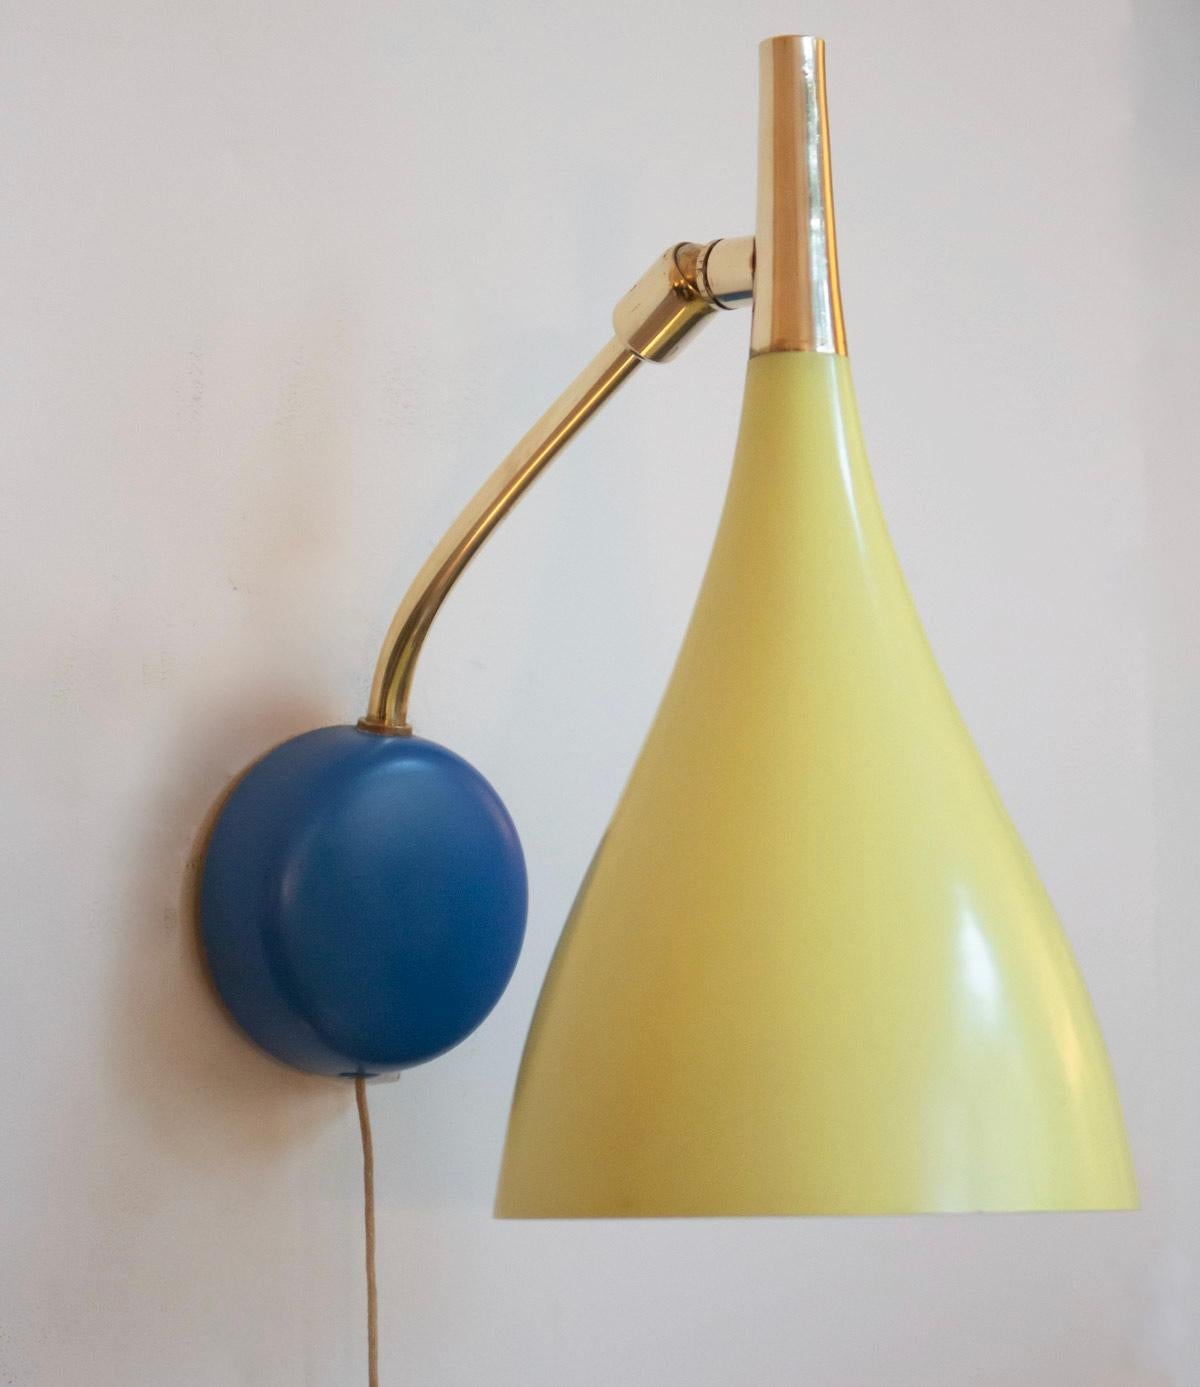 1950s pair of adjustable Cosack Leuchten sconces
Light yellow lacquered adjustable steel lampshades with blue lacquered back plates.
The arms are made of gilded brass.